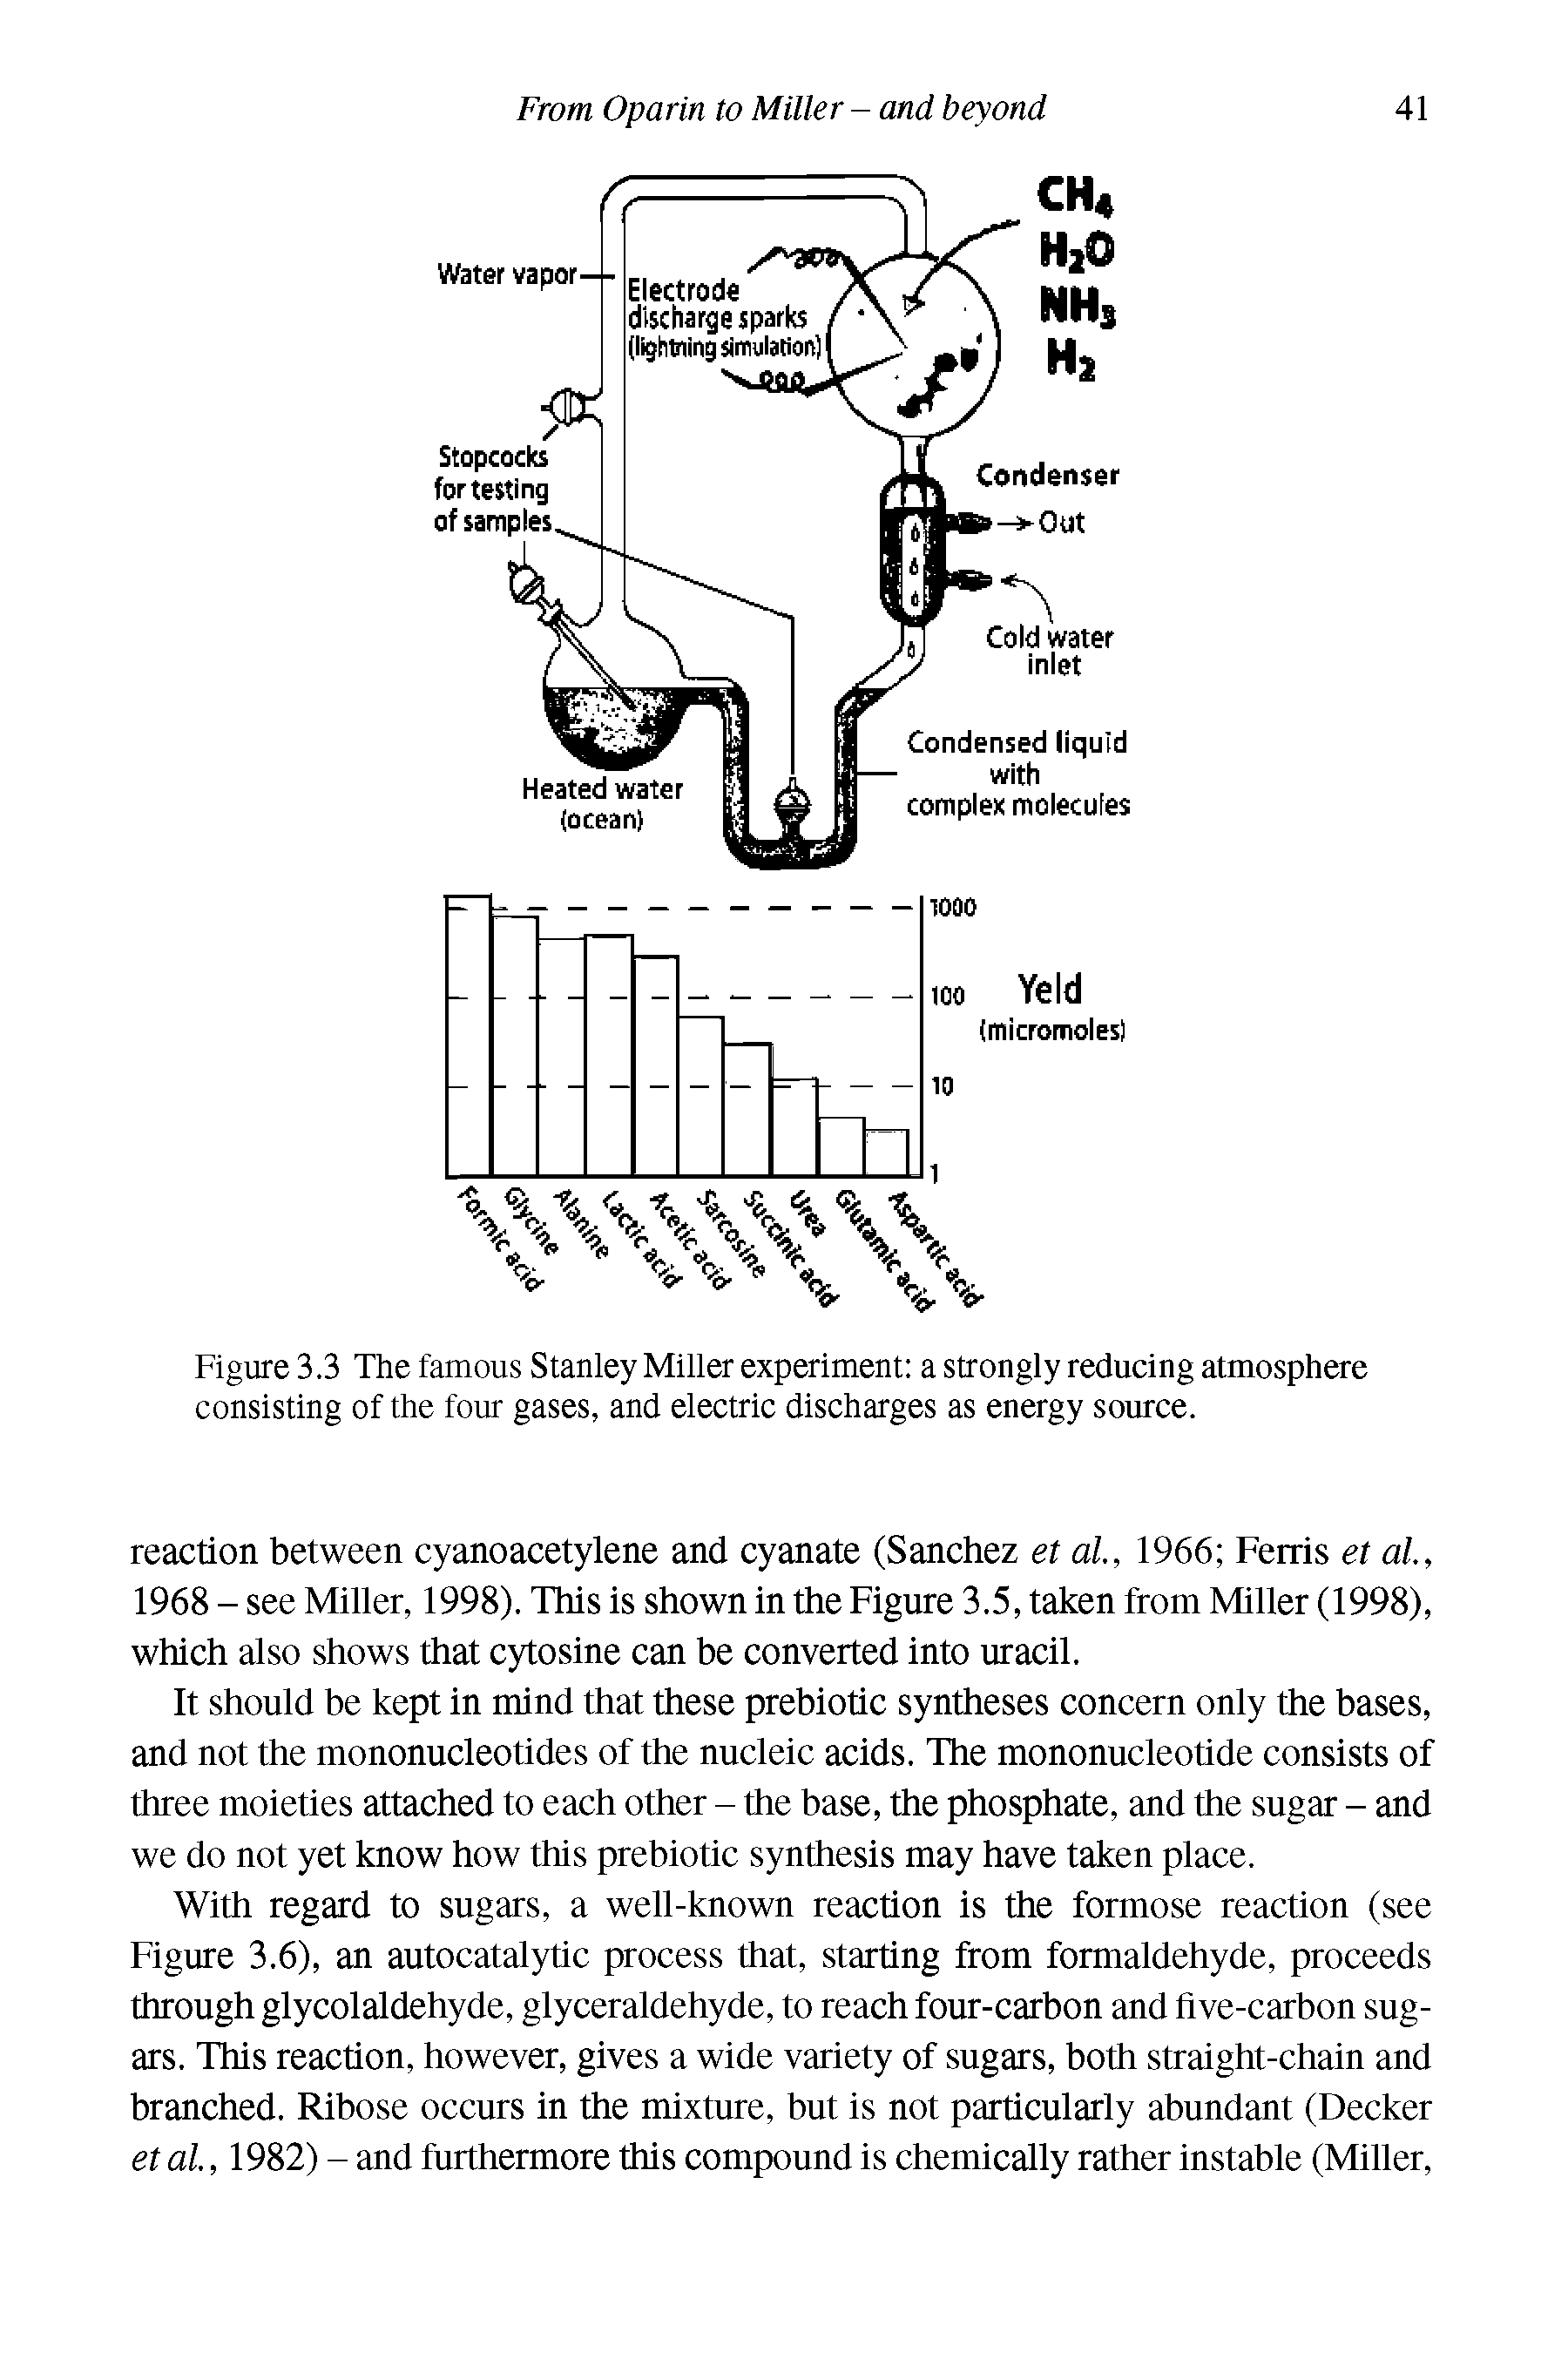 Figure 3.3 The famous Stanley Miller experiment a strongly reducing atmosphere consisting of the four gases, and electric discharges as energy source.